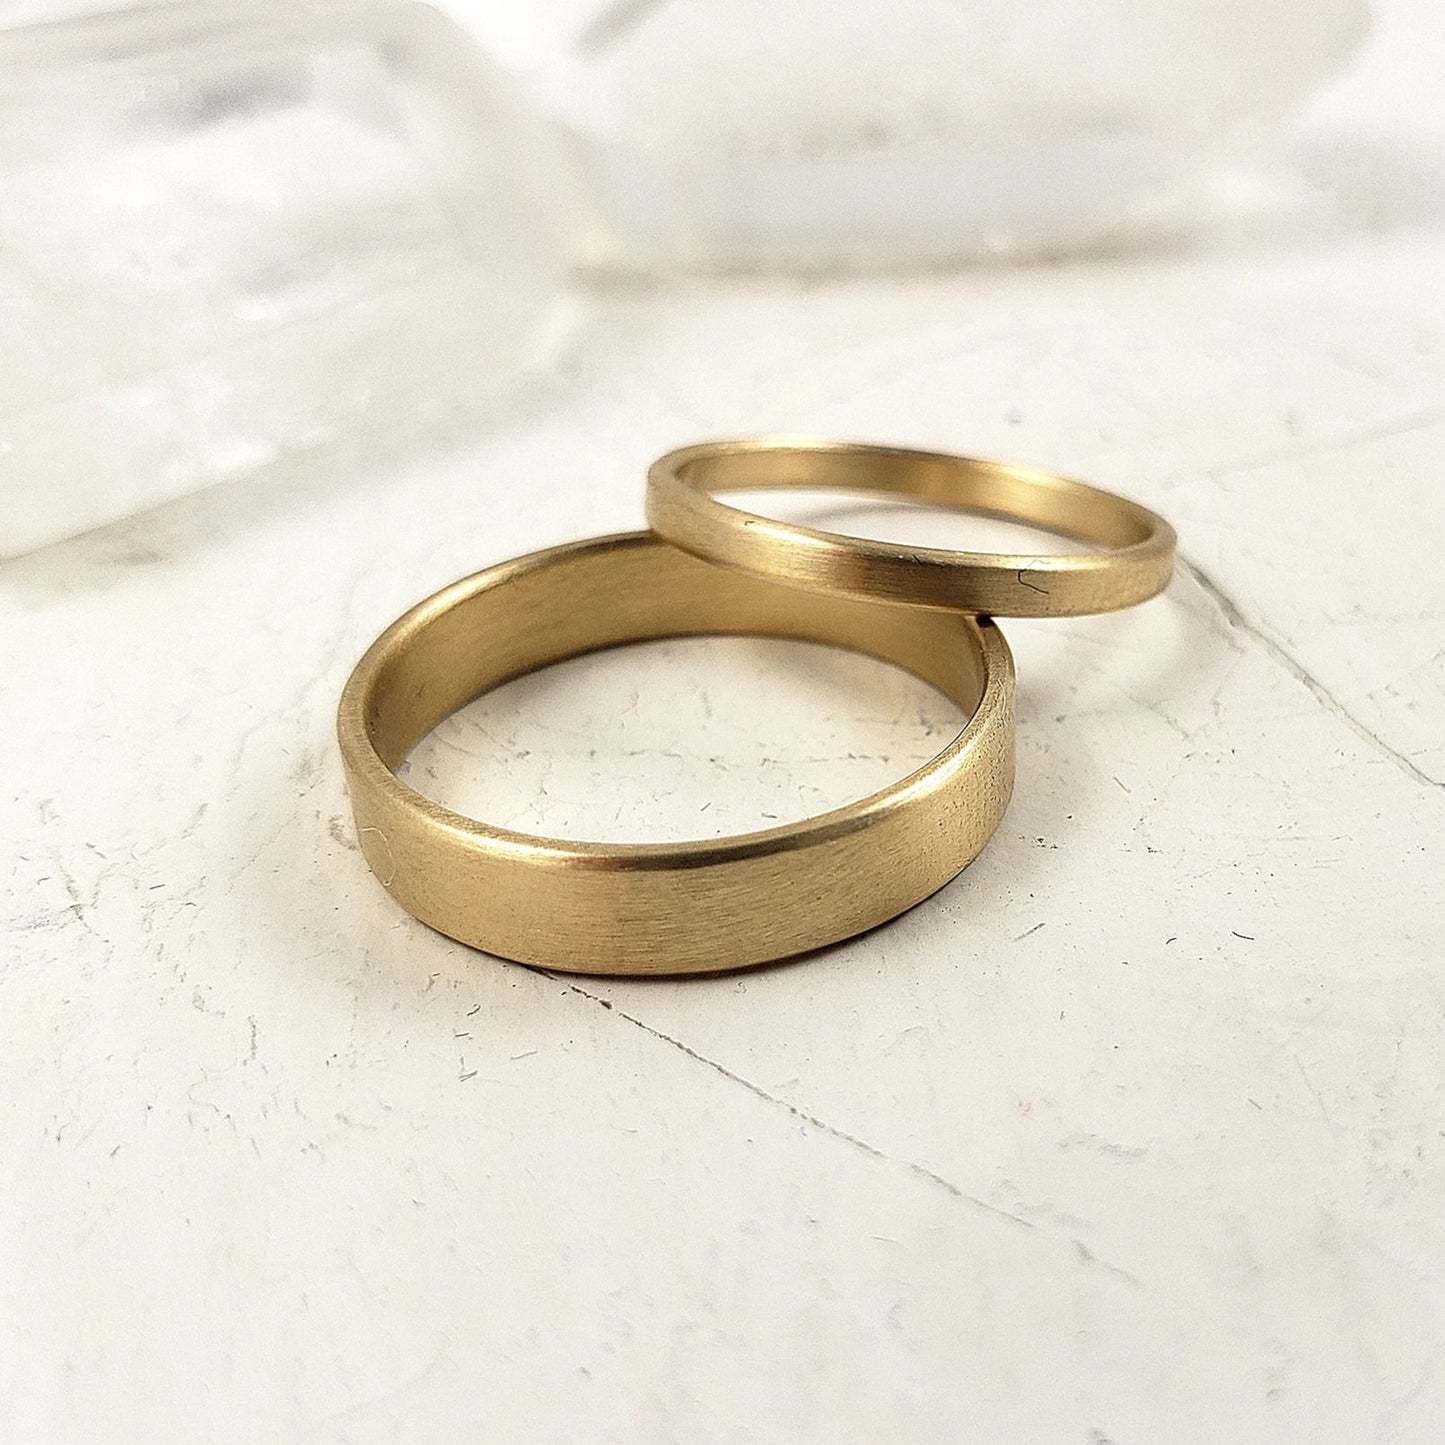 Set of solid gold engagement rings, Modern, Sophisticated, Contemporary gold rings